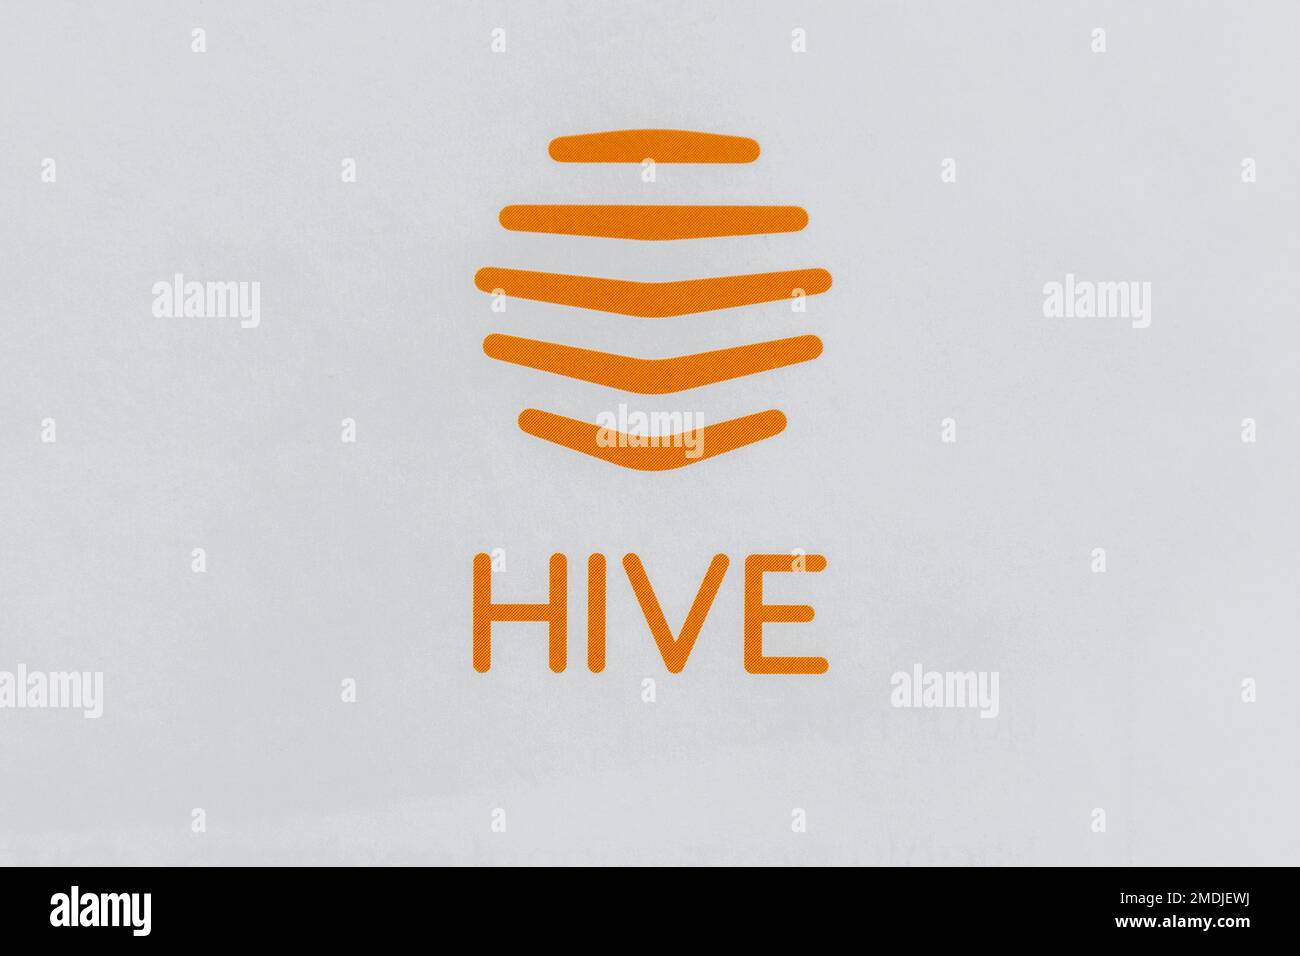 Hive logo, company that supplies smart devices for home use, UK Stock Photo